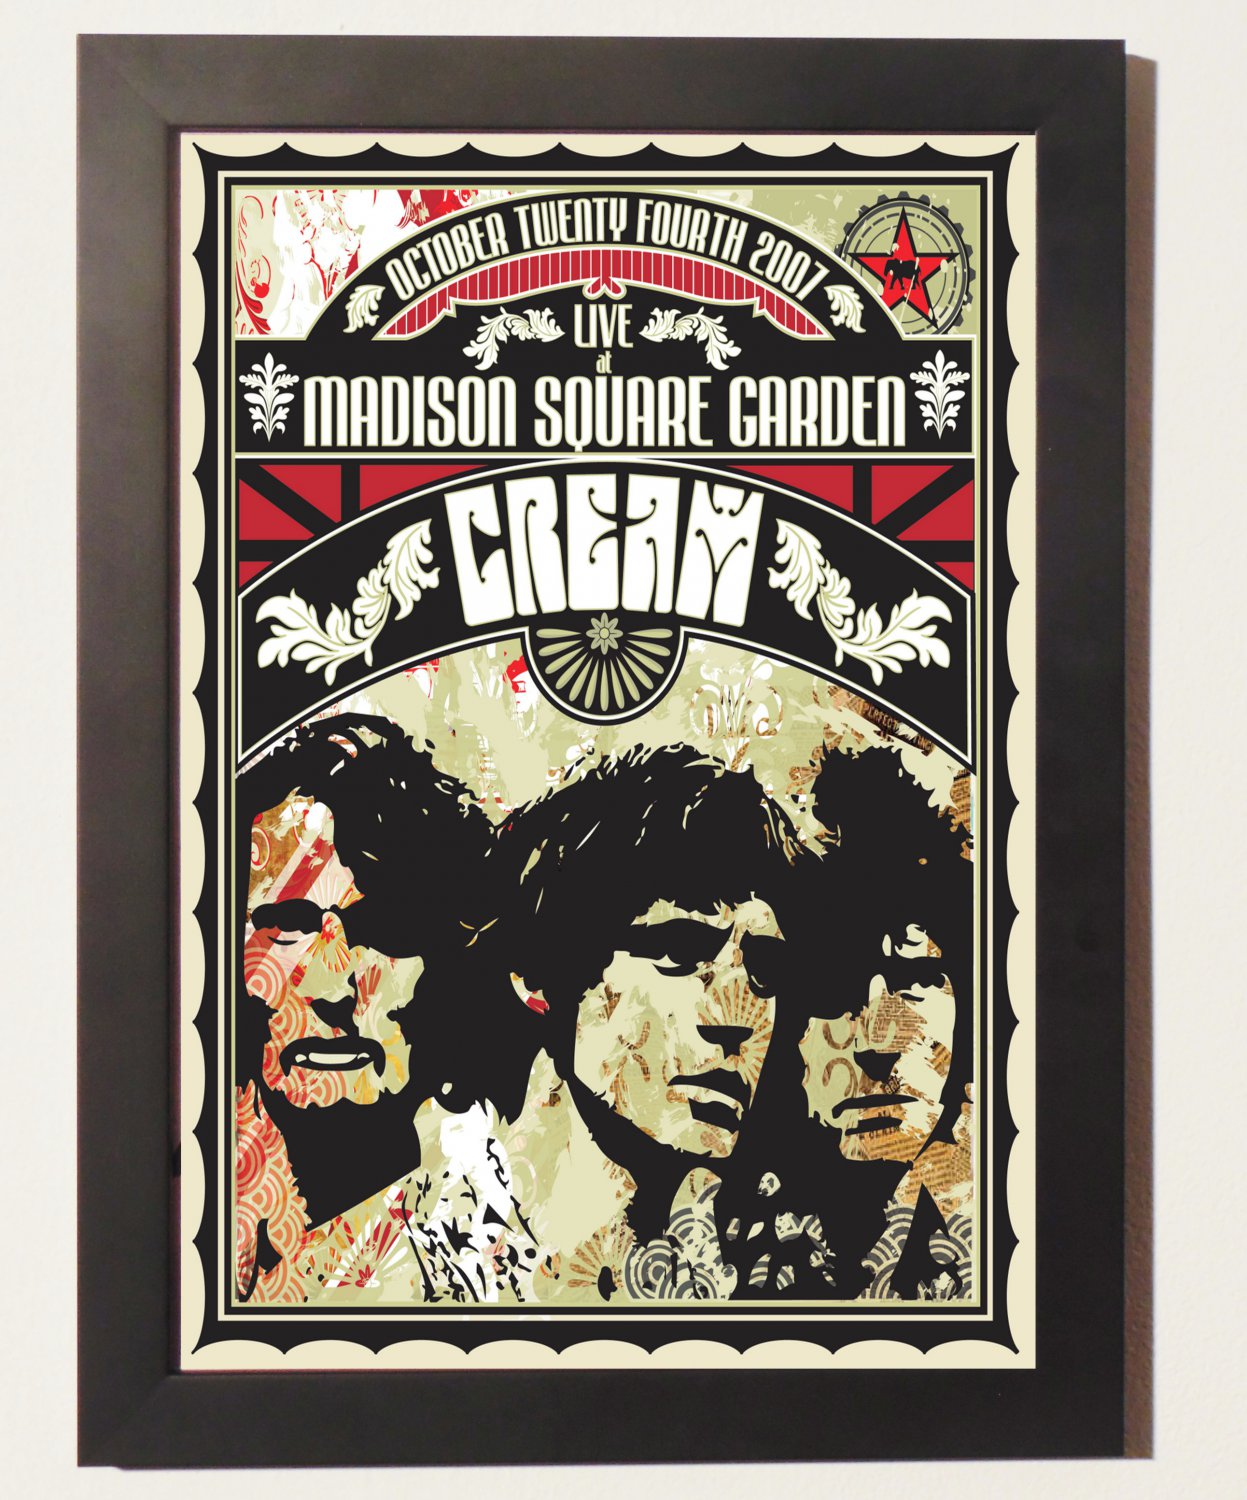 Cream Band 2007 Concert 13"x19" (32cm/49cm) Polyester Fabric Poster